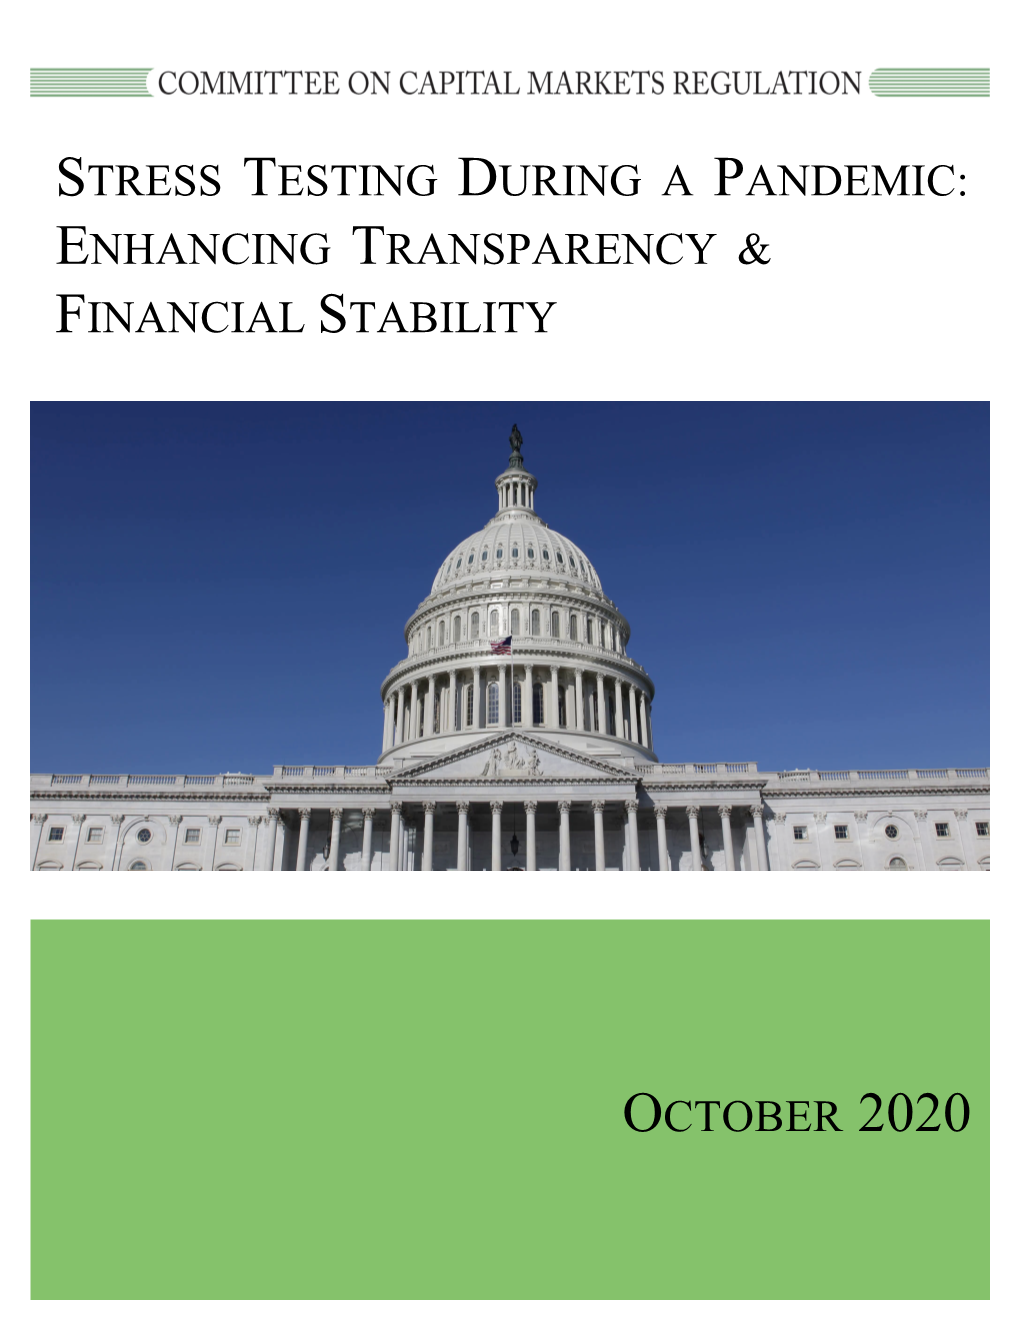 Stress Testing During a Pandemic: Enhancing Transparency & Financial Stability